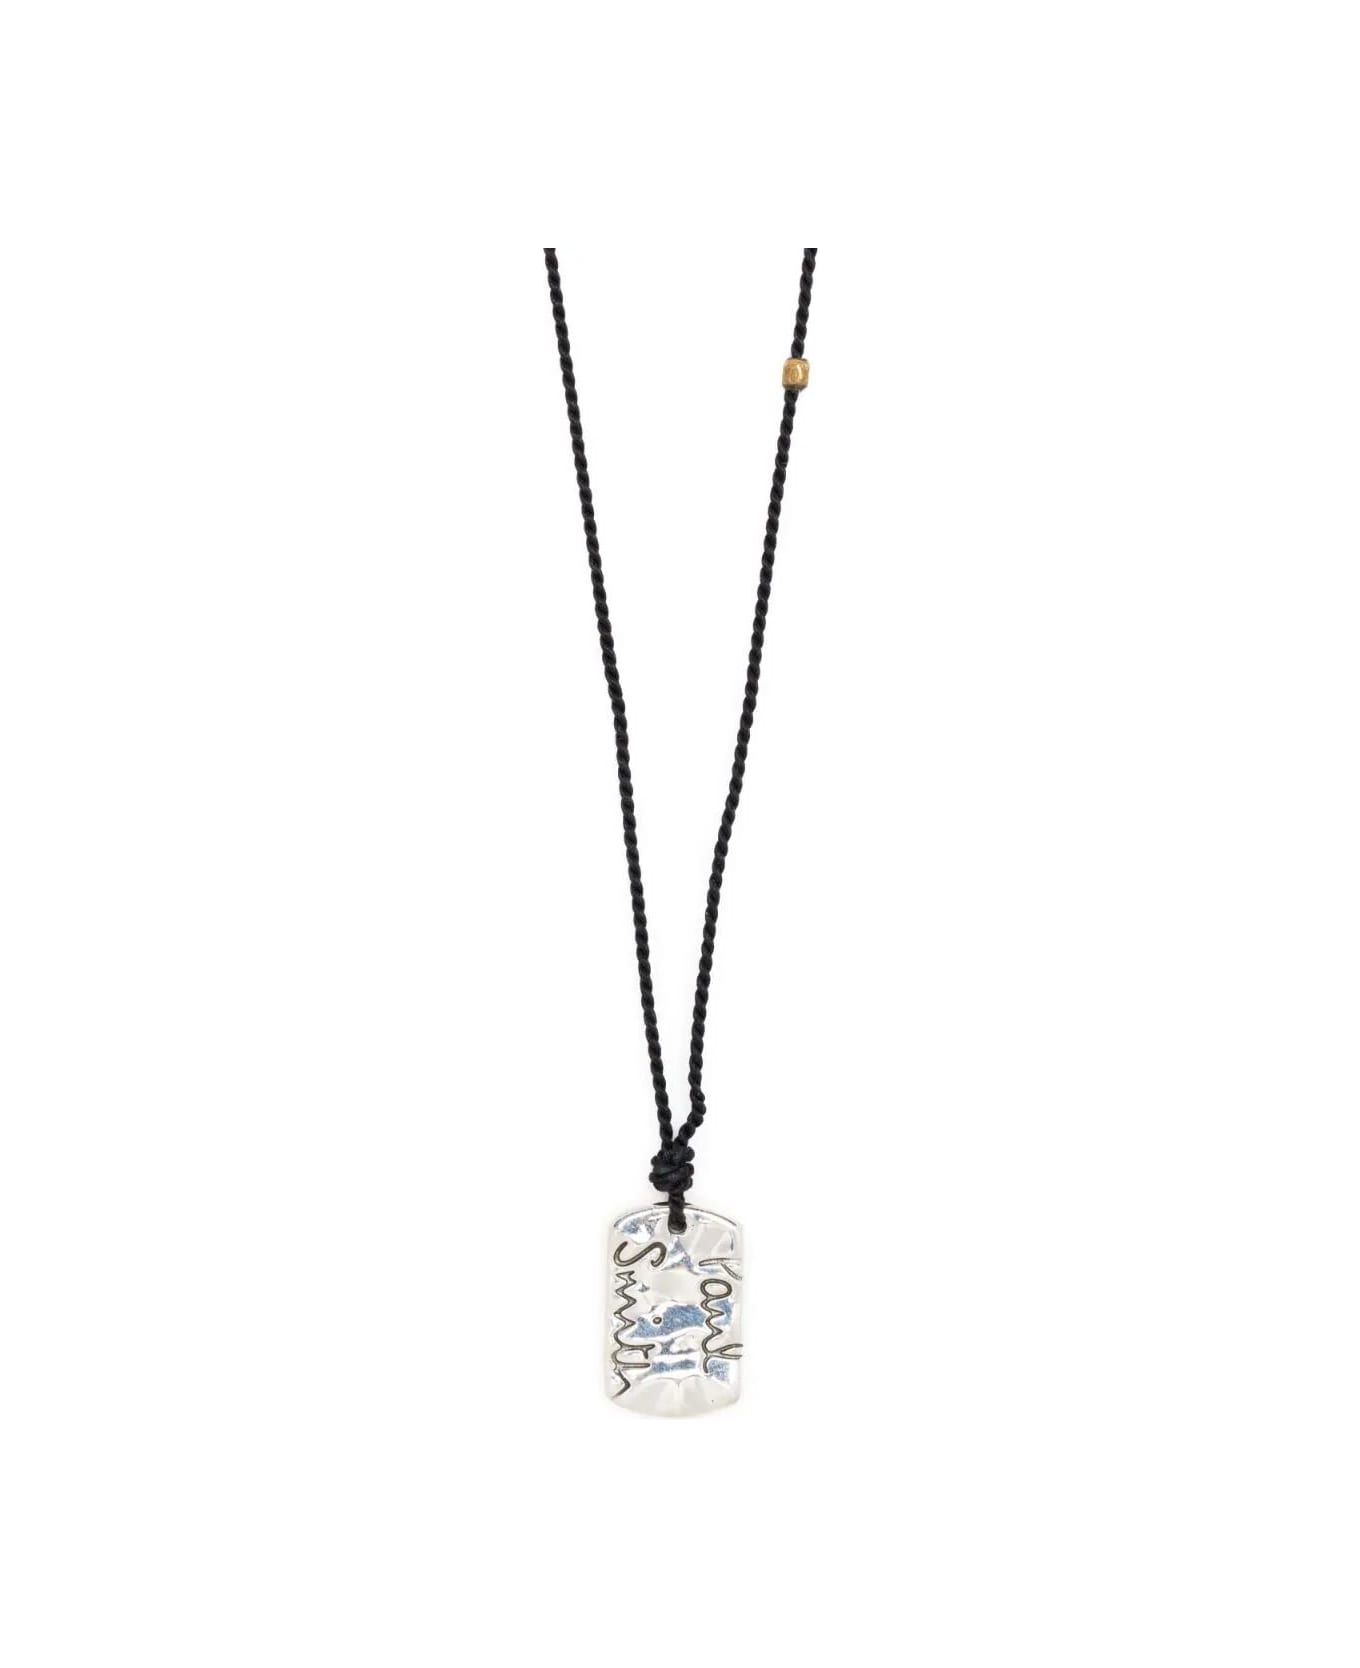 Paul Smith Men Necklace Single Tag - Metallics ネックレス